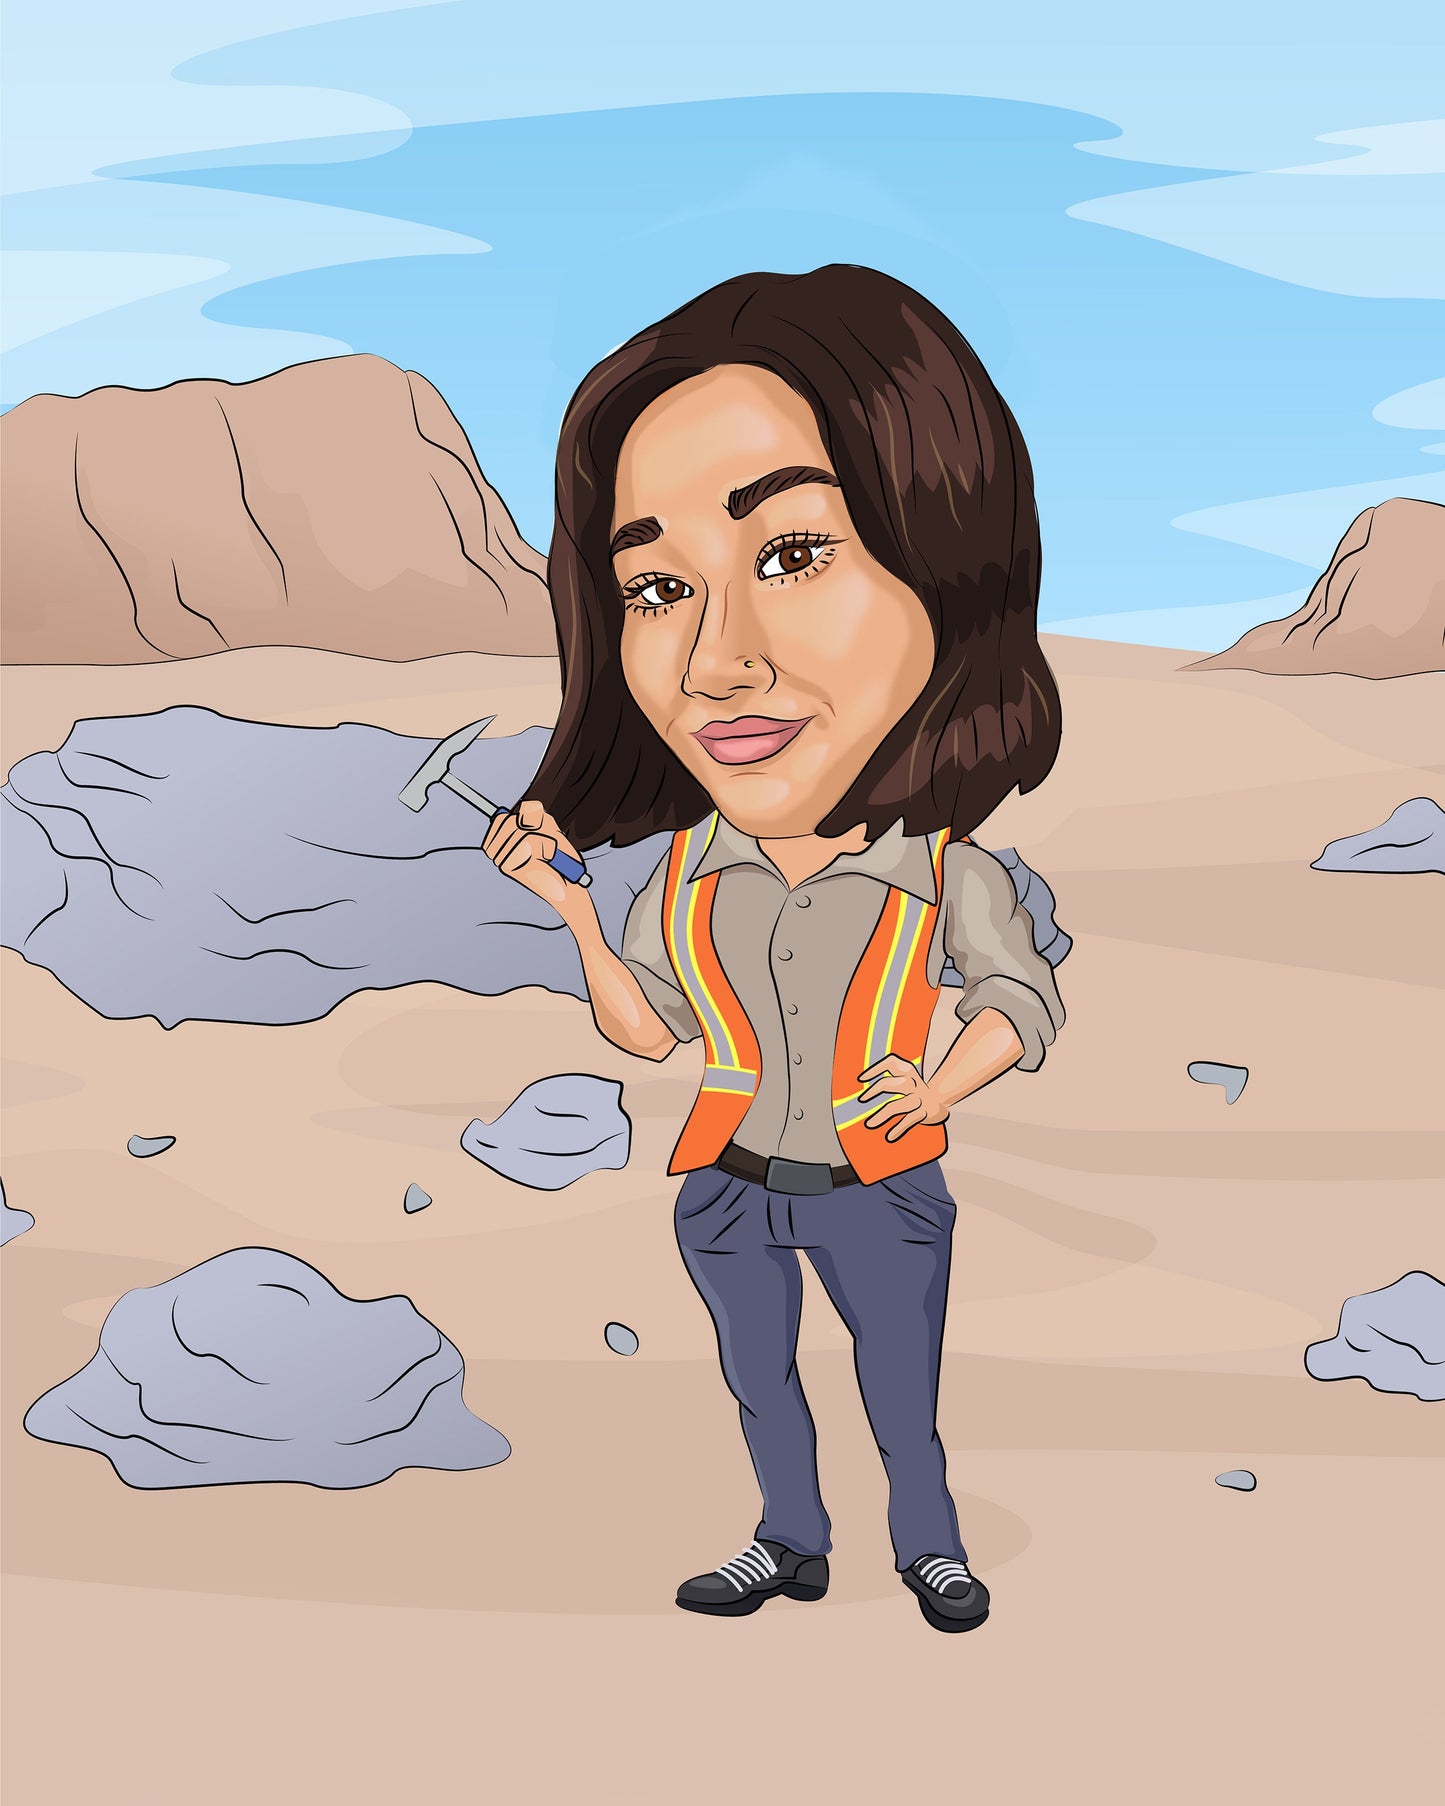 Geologist Gift - Custom Caricature Portrait From Your Photo/earth scientist/geology student gift